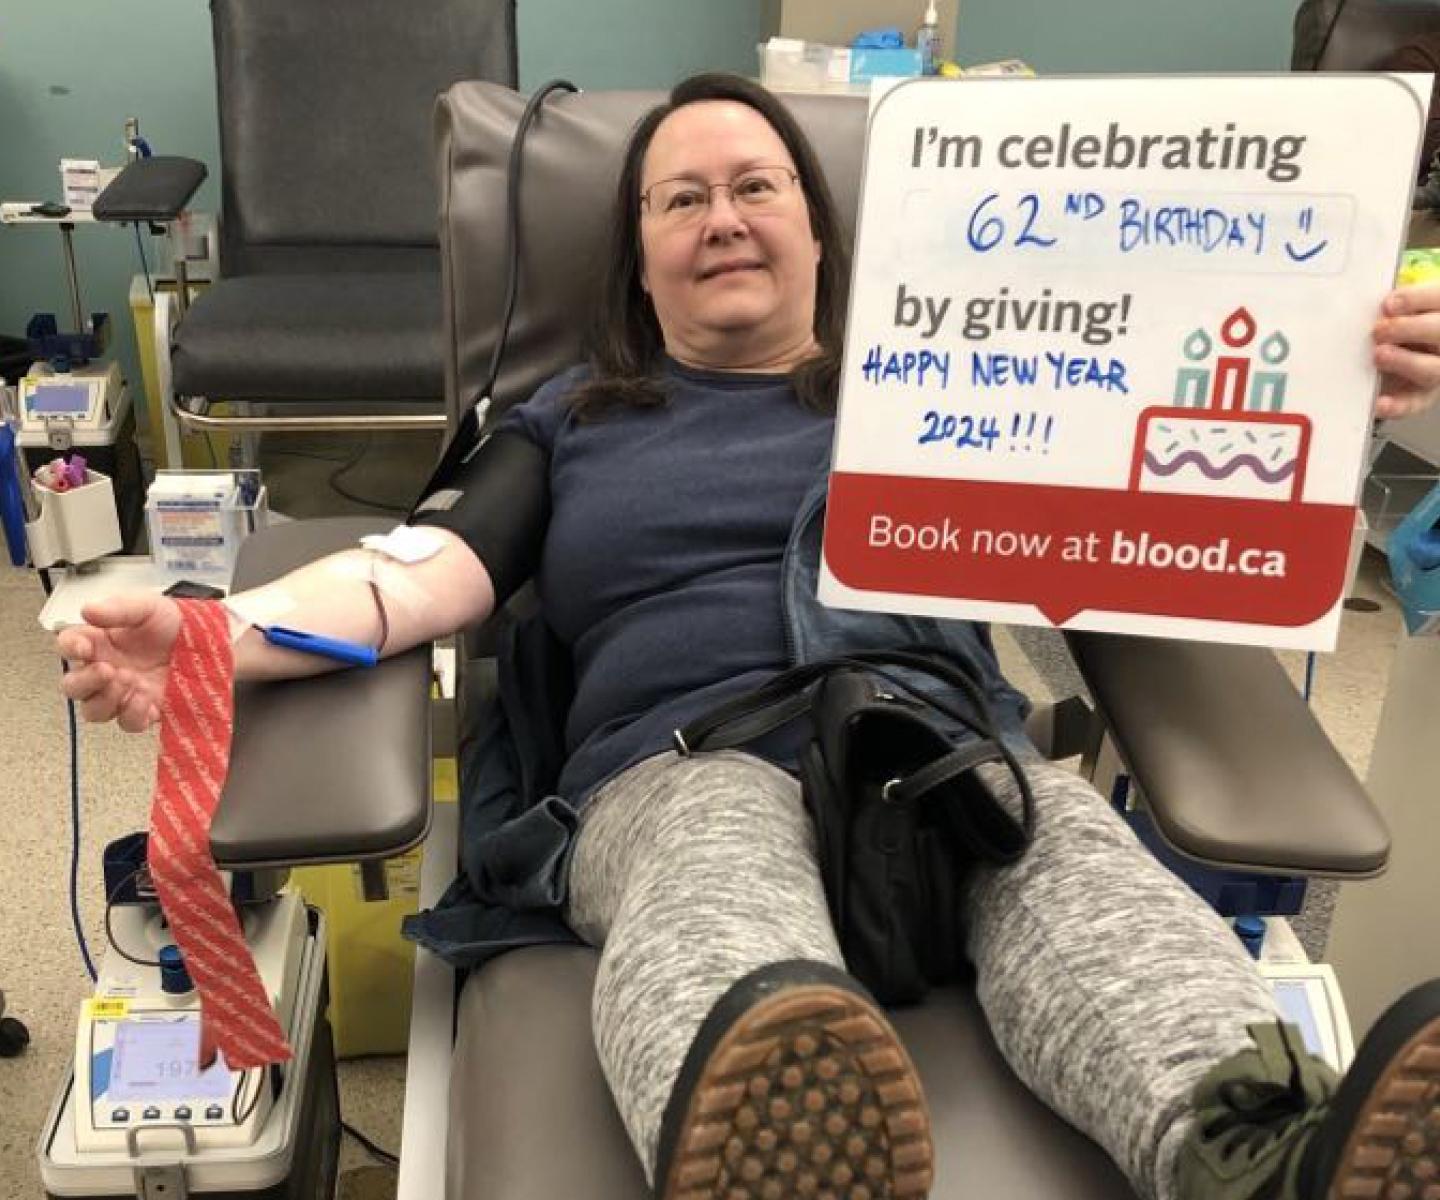 Donor giving blood while holding 62nd birthday sign